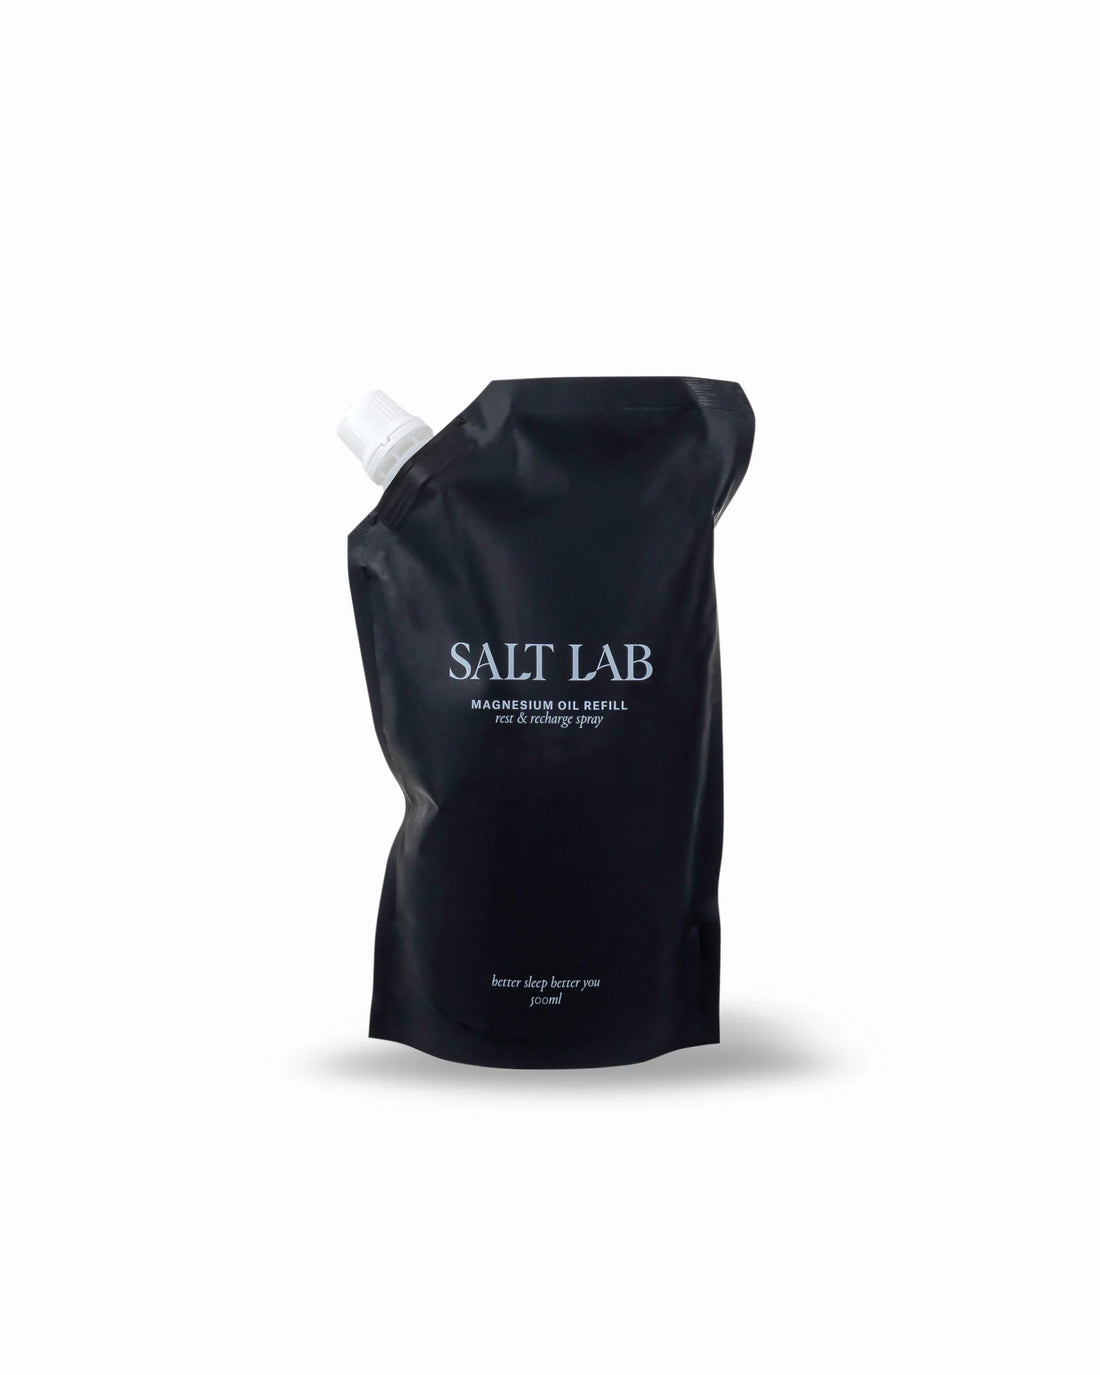 Salt Lab Magnesium Oil Spray Refill Pouch - The Flower Crate